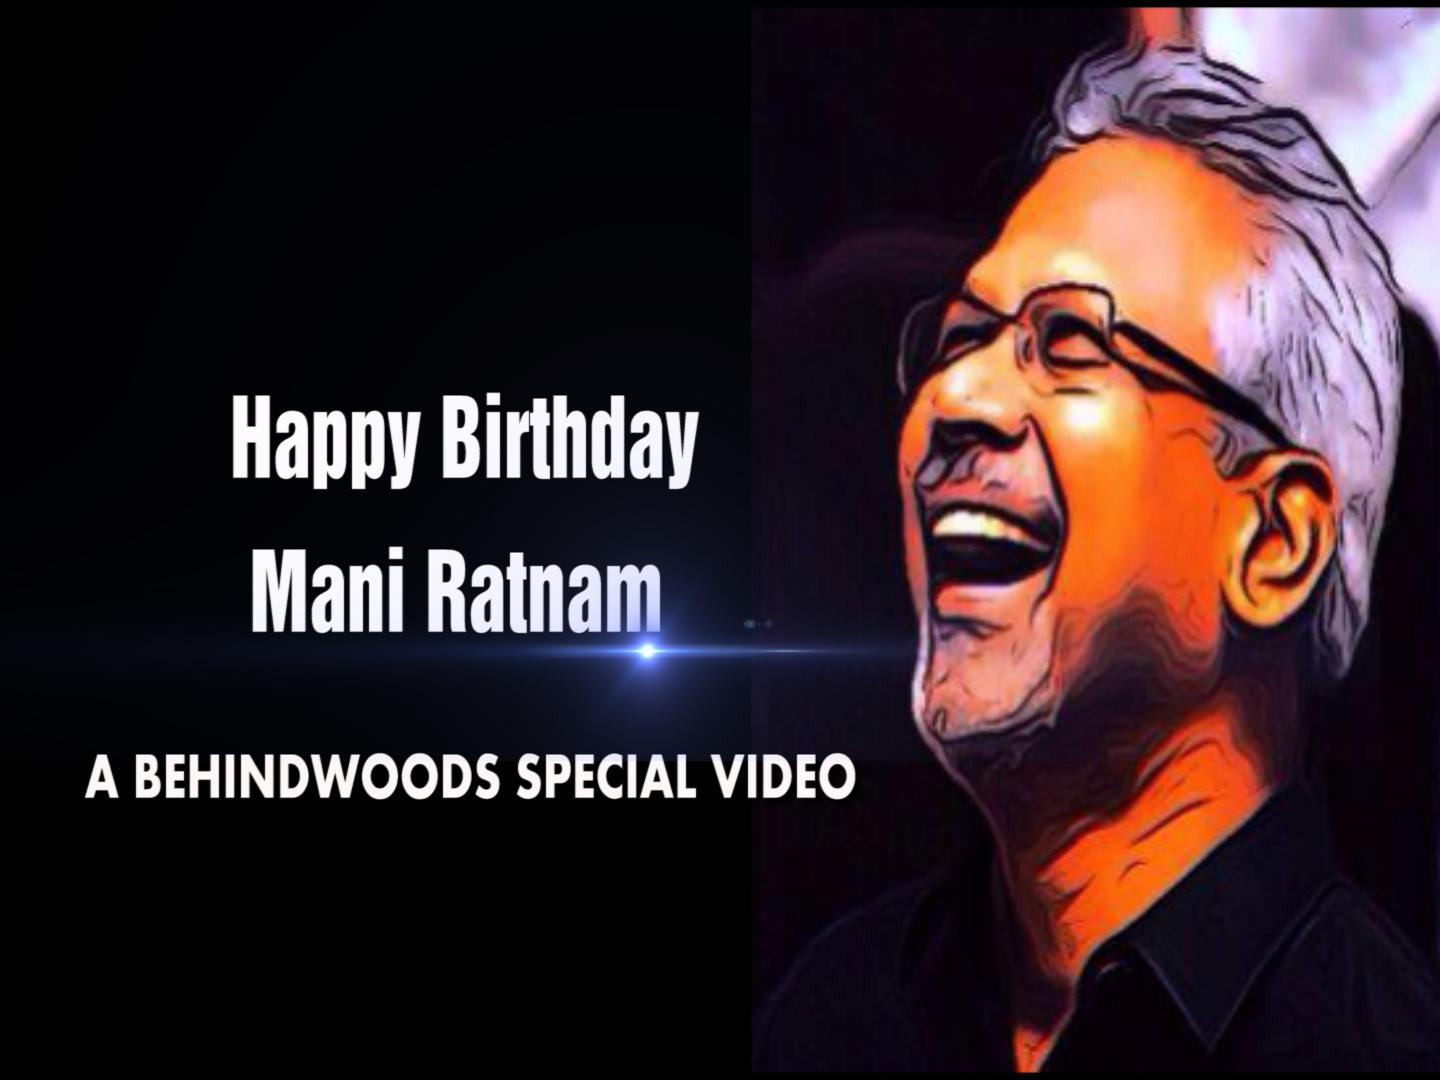 Happy Birthday A Behindwoods Special video!  